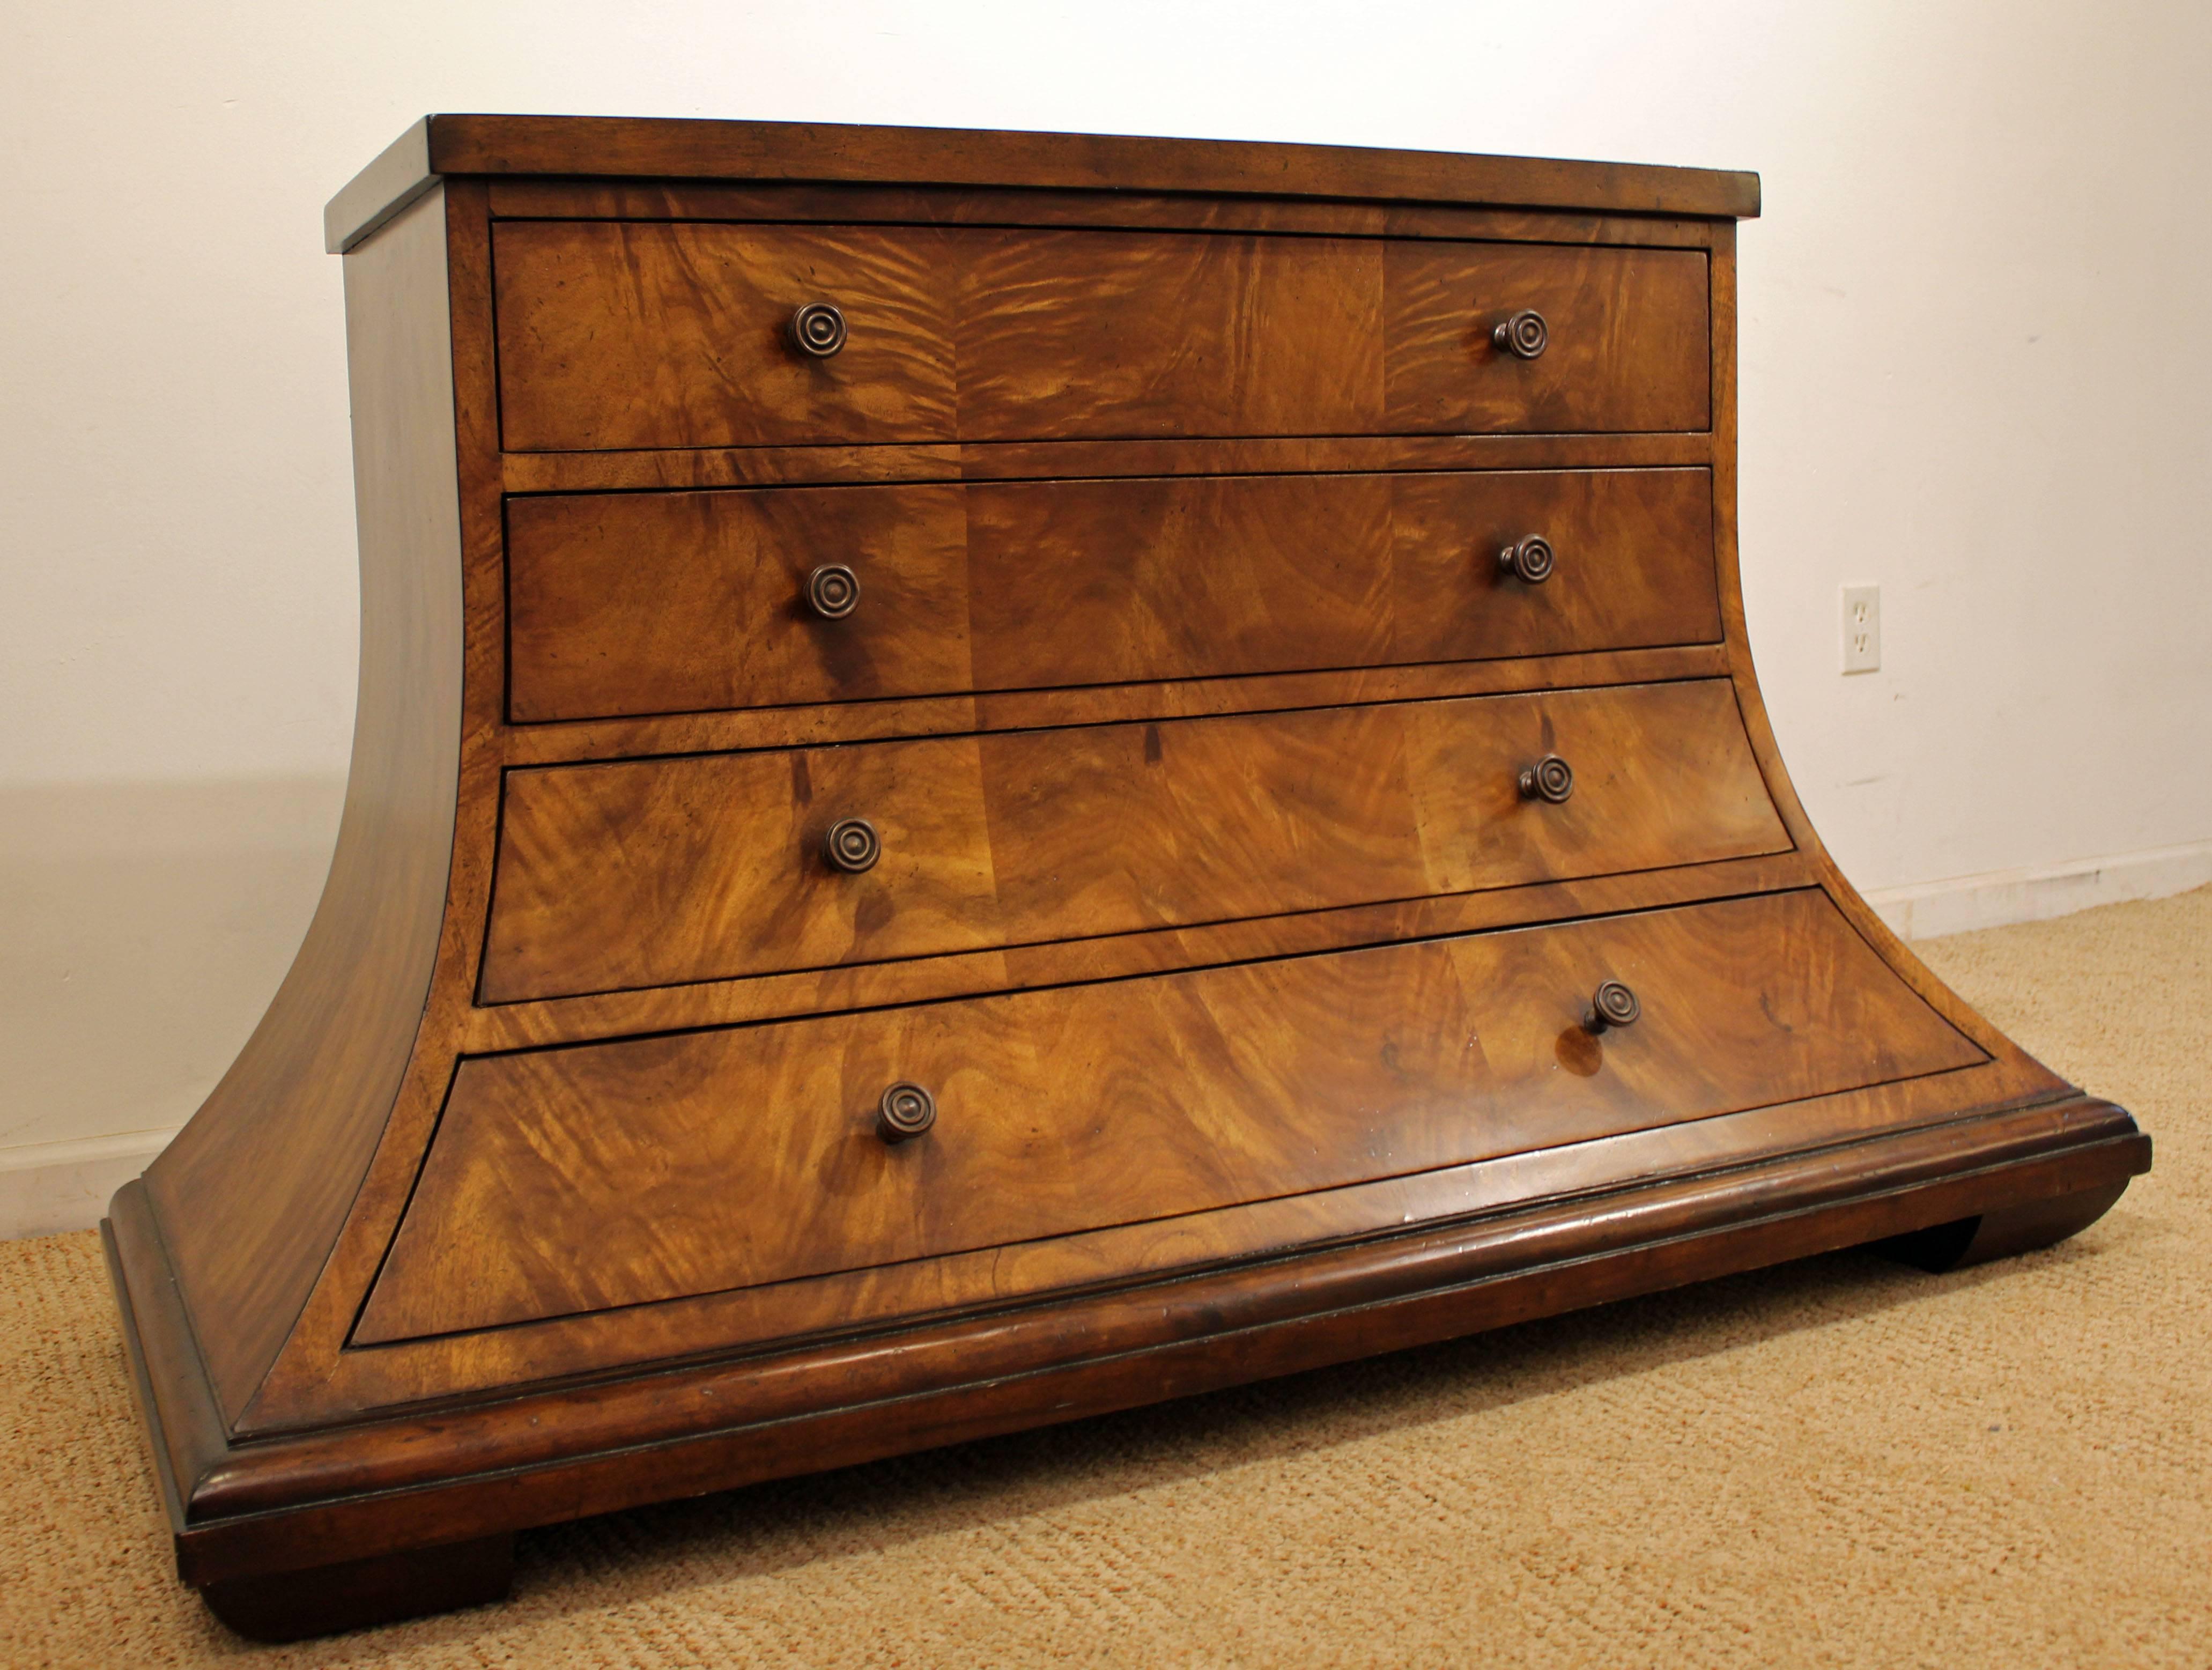 This is a very unique piece with a trapezoid shape and stone top. It looks to made with burl wood and a marble top, but we are not 100% sure. The piece is signed by Monarch Fine Furniture for Century.